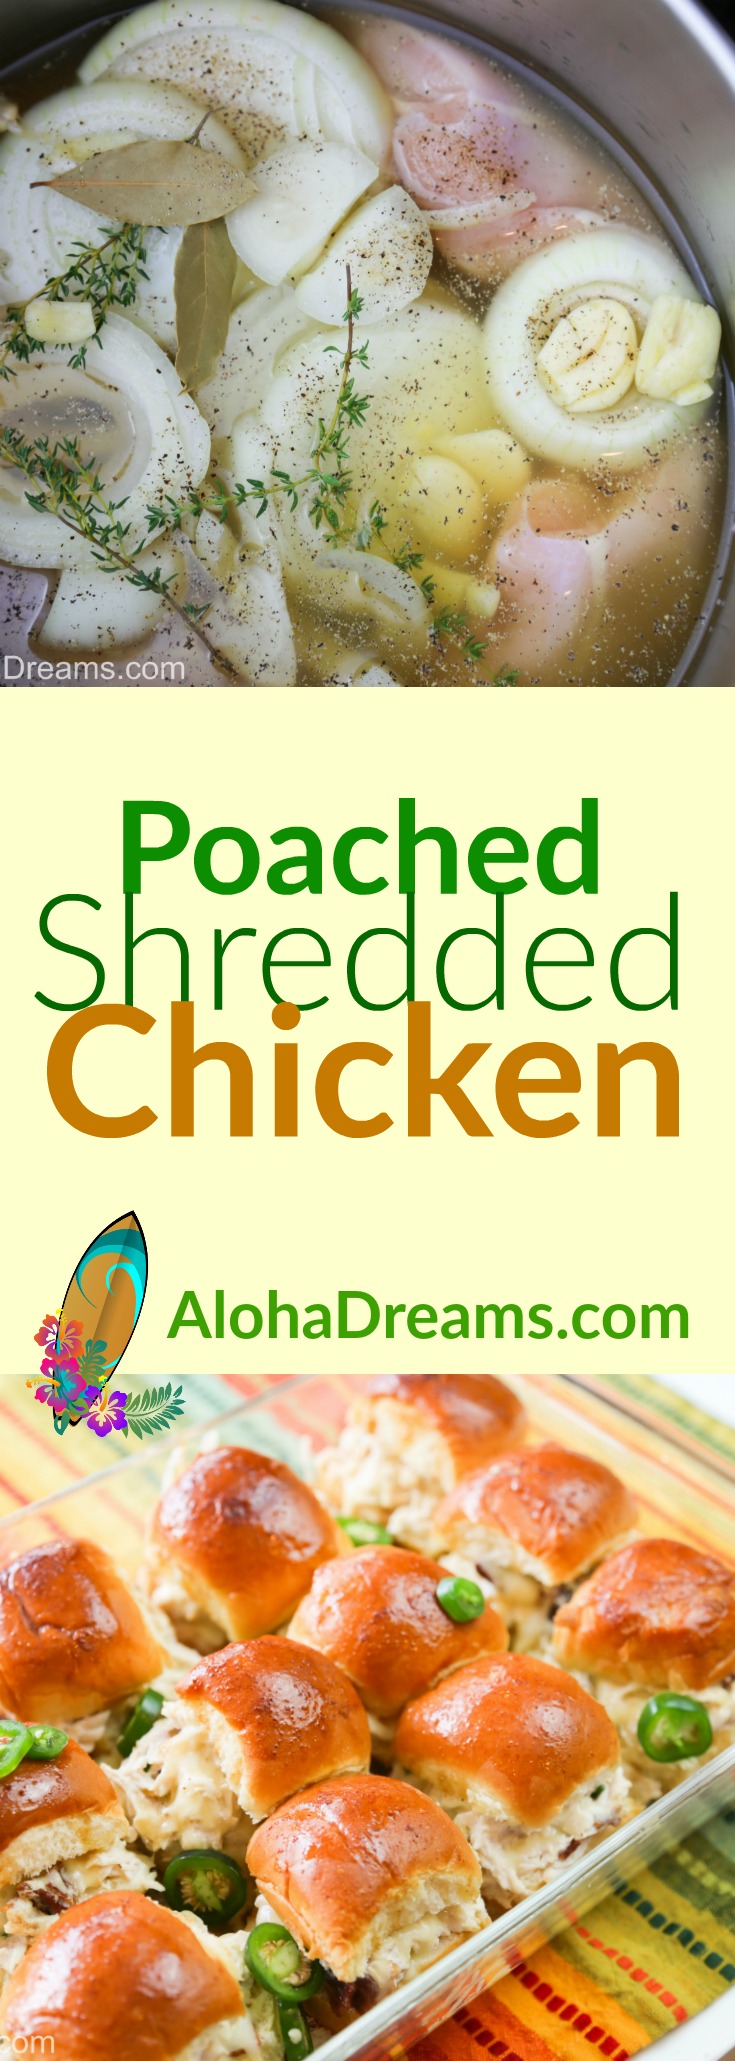 Poached Shredded Chicken